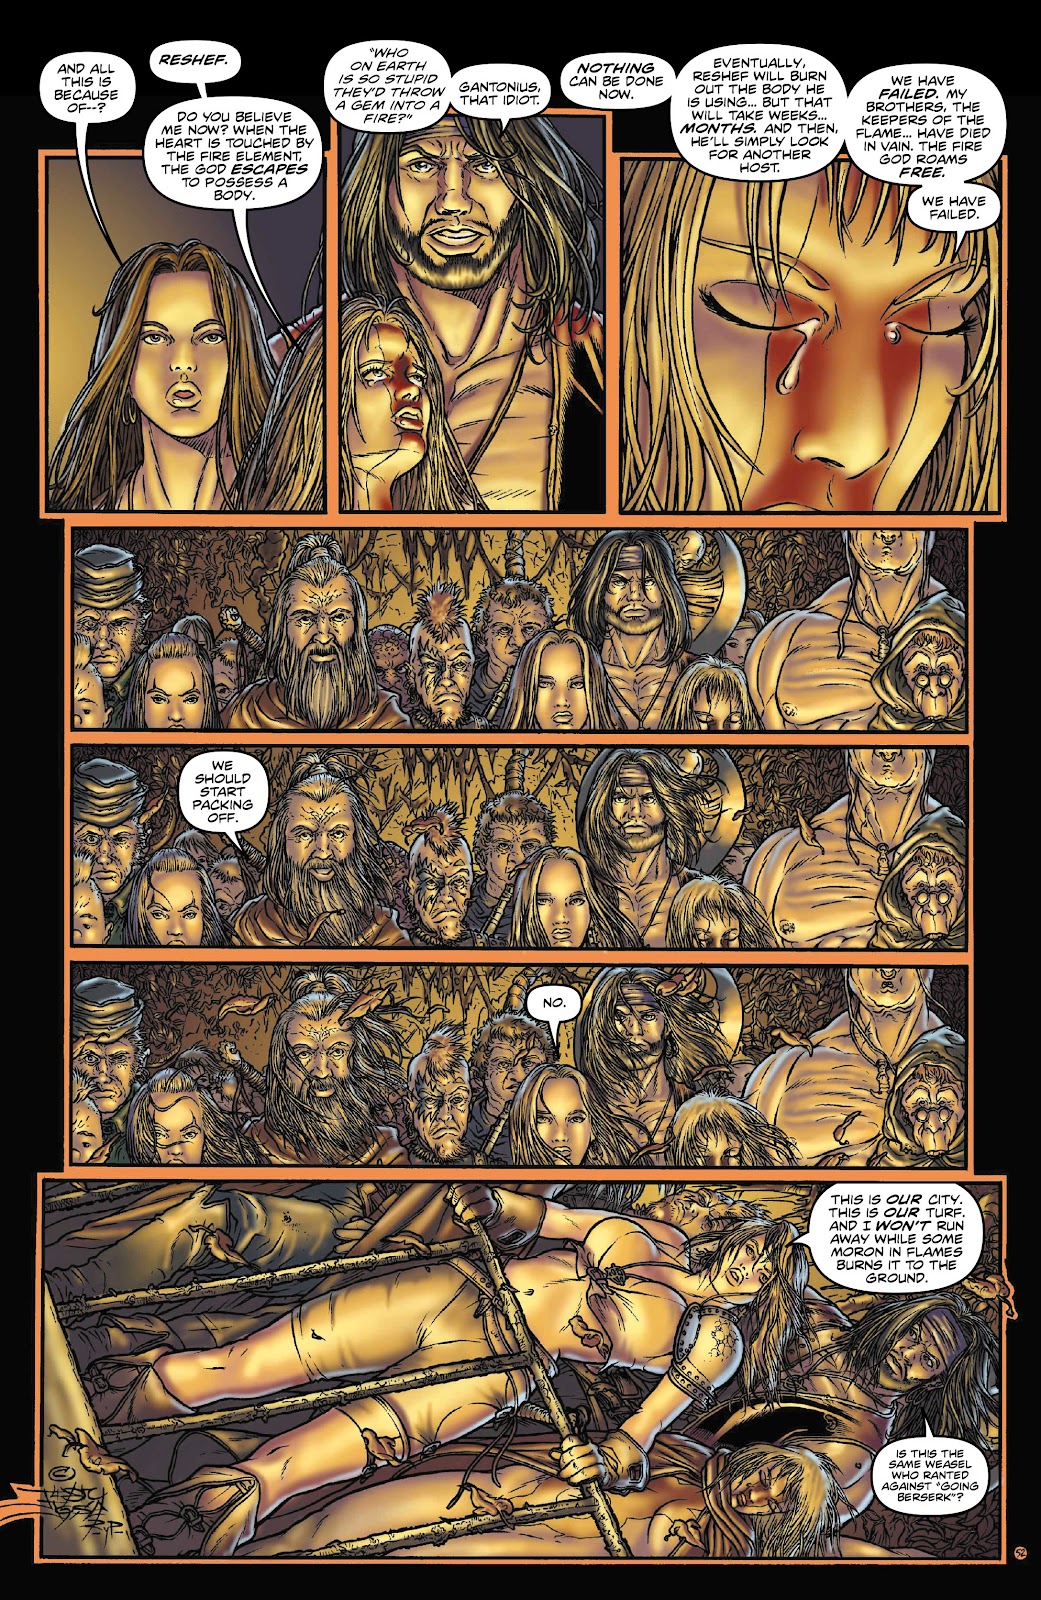 Rogues!: The Burning Heart issue 3 - Page 10